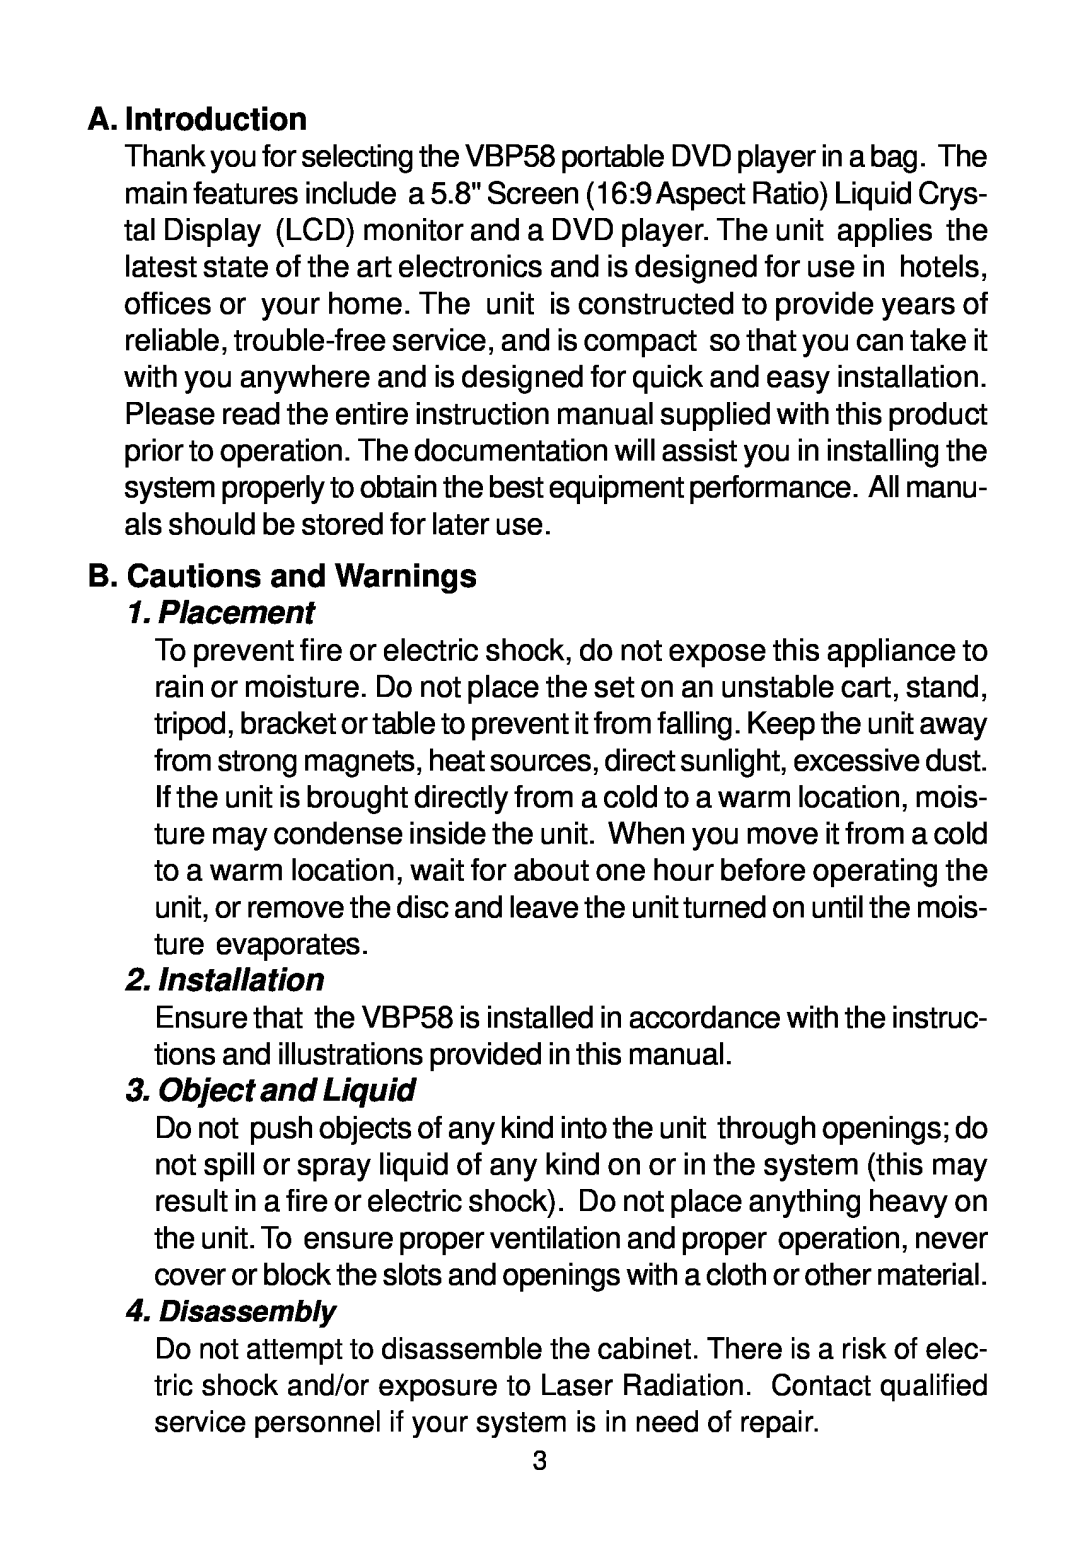 Audiovox VBP58 manual A. Introduction, B. Cautions and Warnings, Disassembly, Placement, Installation, Object and Liquid 